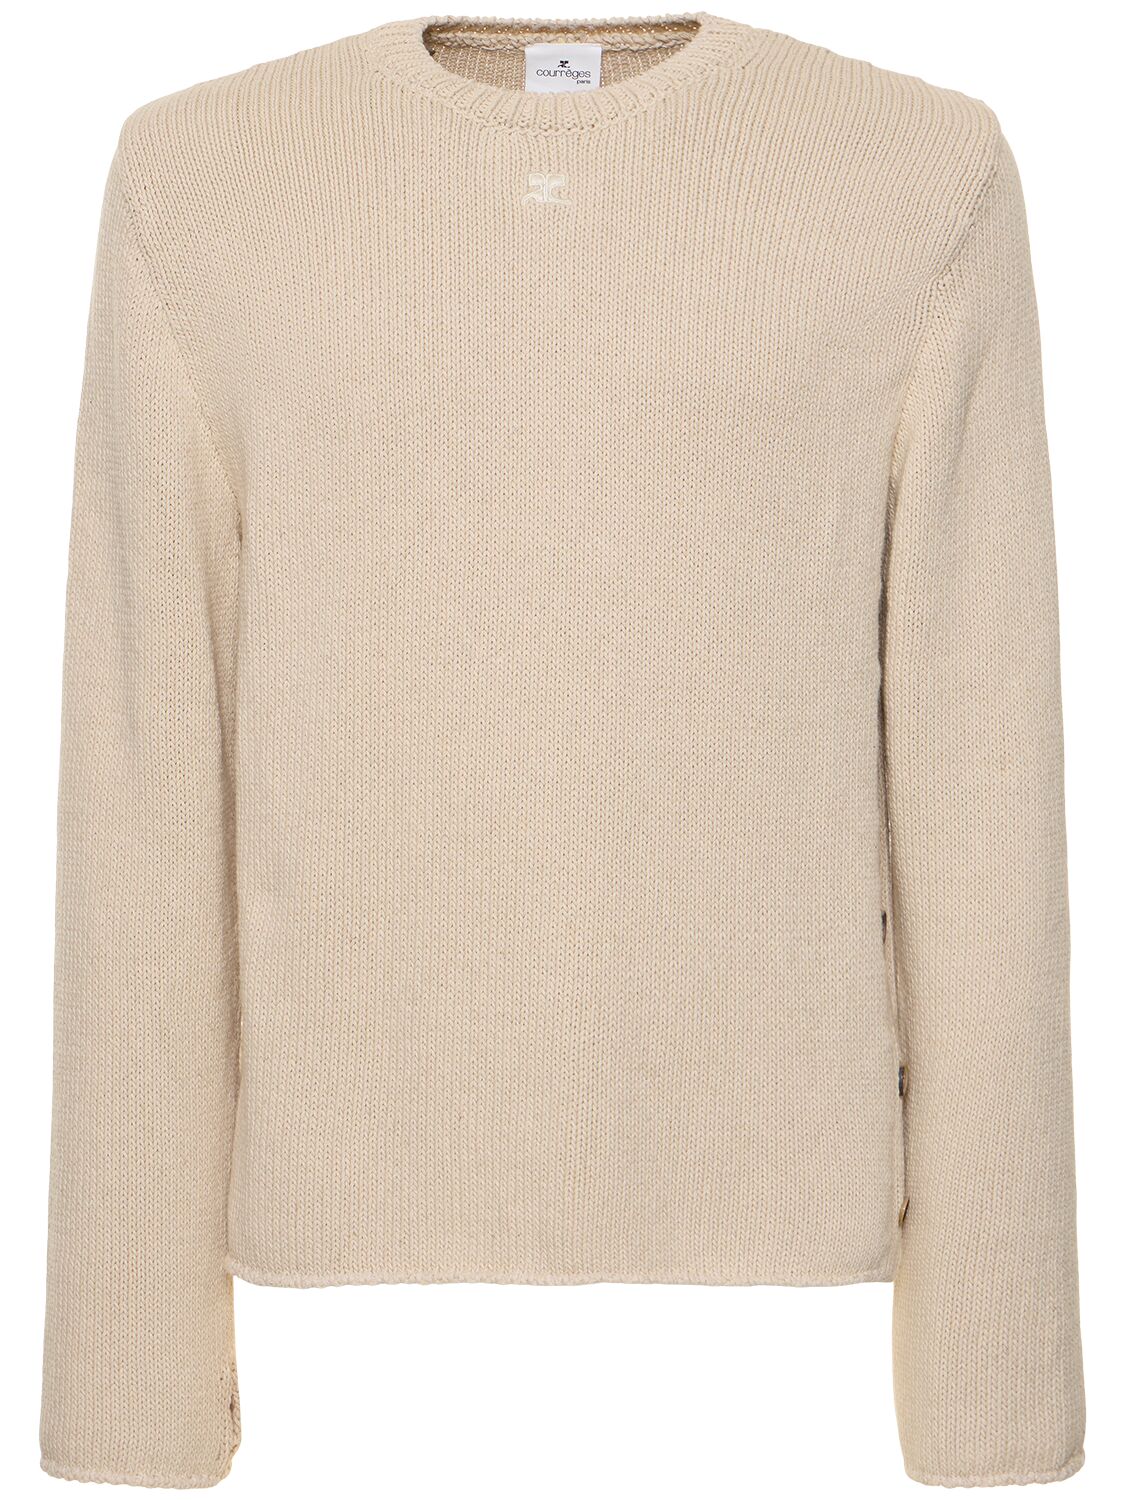 Image of Open Side Cotton & Linen Knit Sweater